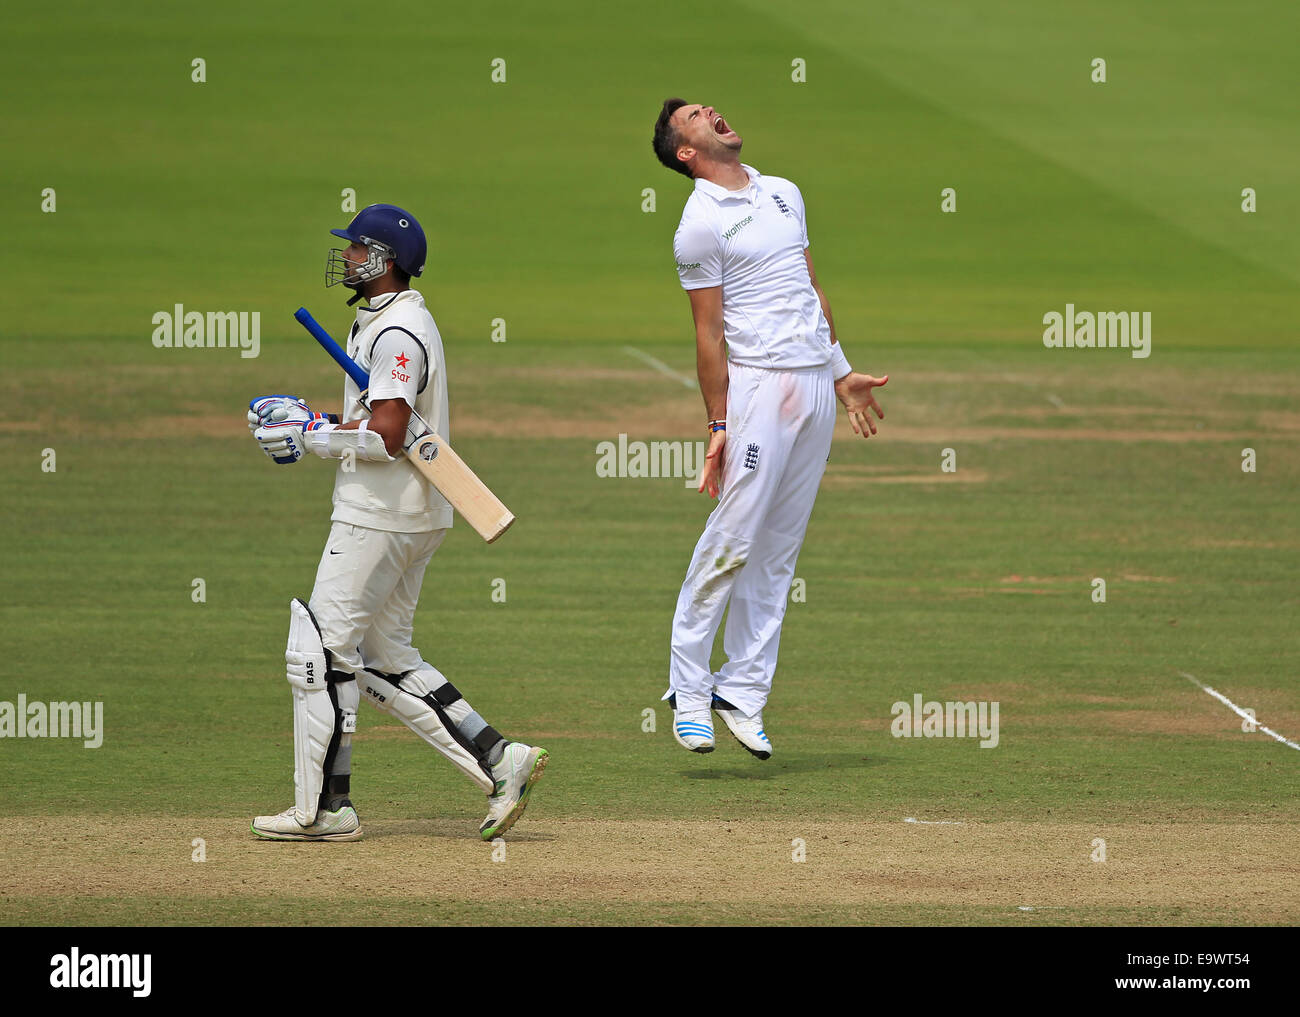 Cricket - James Anderson of England celebrates taking the wicket of Murali Vijay of India at the Lord's Test match in 2014 Stock Photo